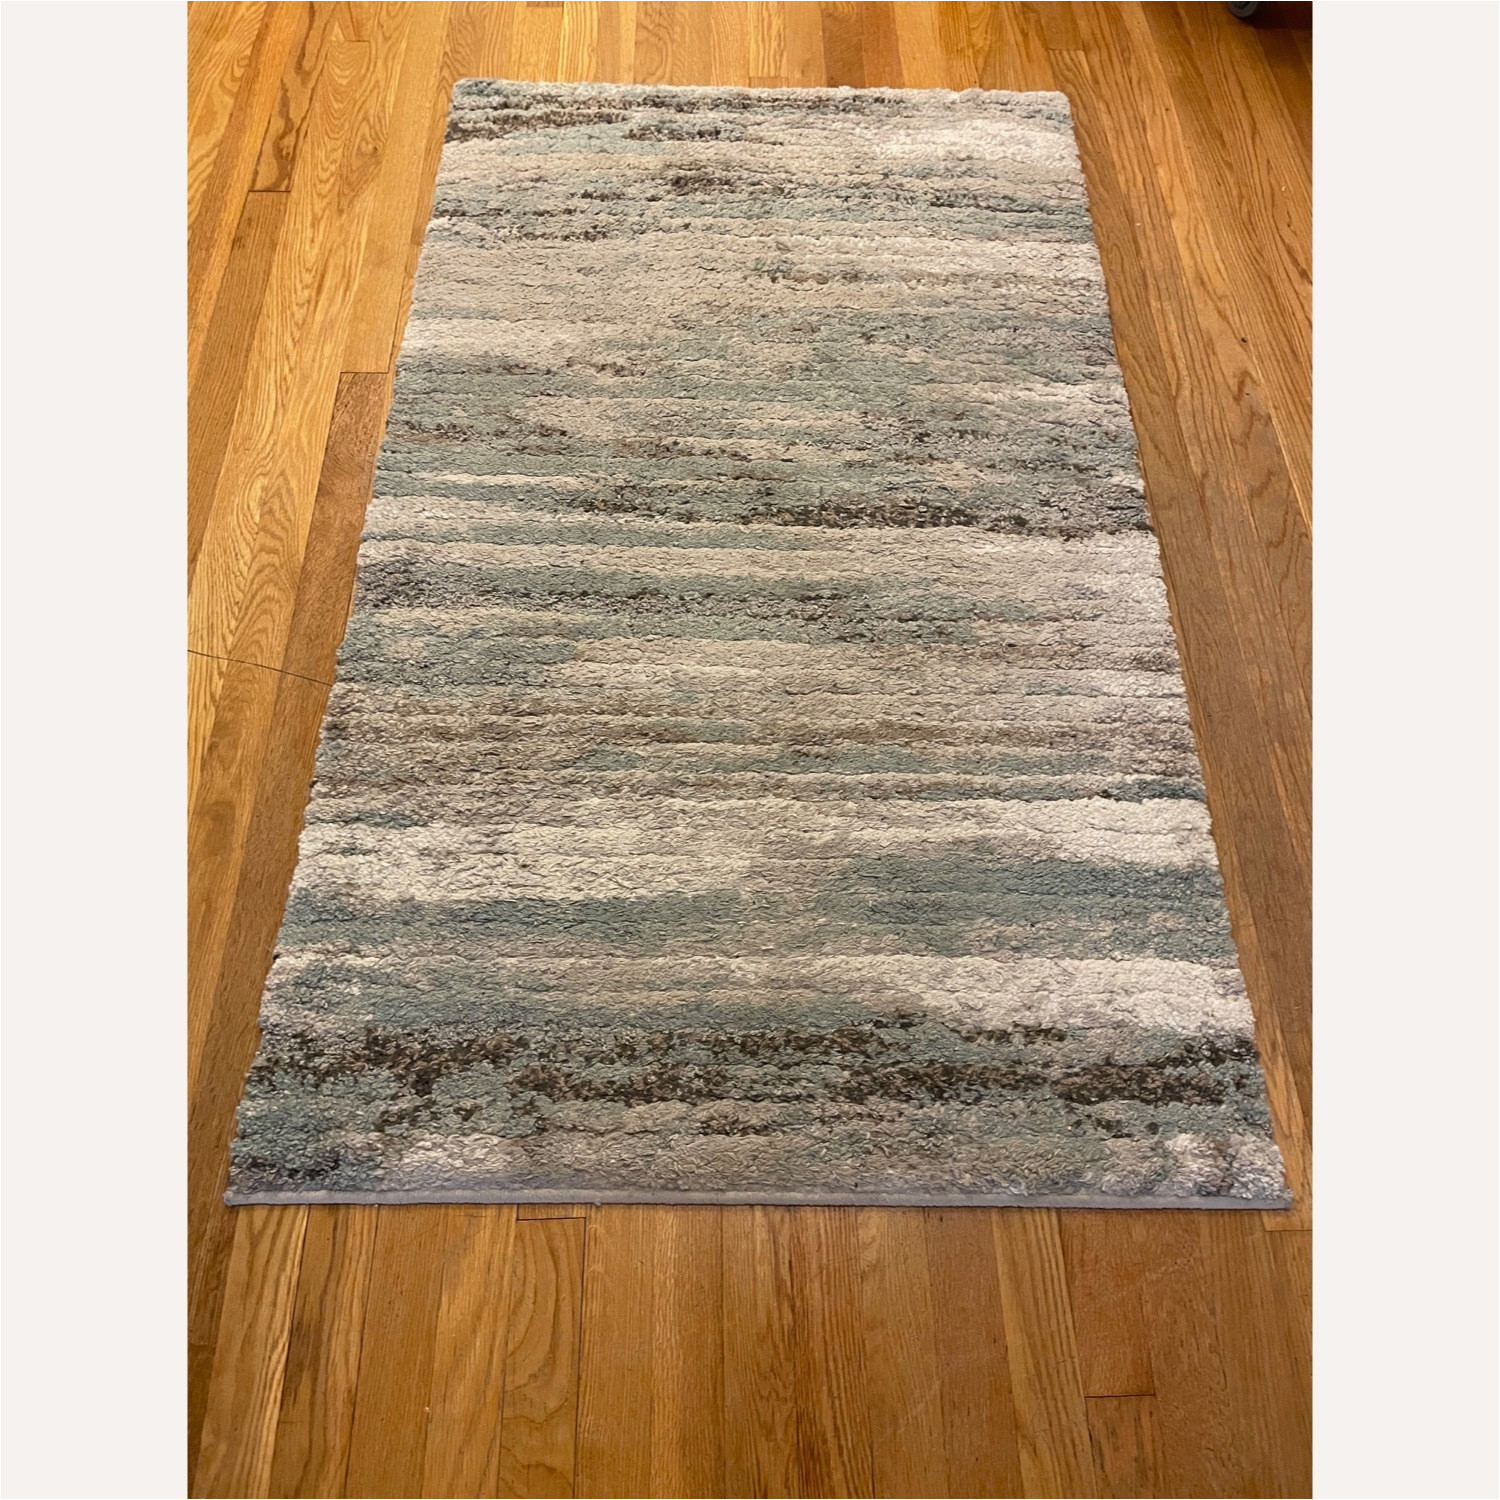 Stillwater Rug Bed Bath and Beyond Structures Collection Stillwater area Rug